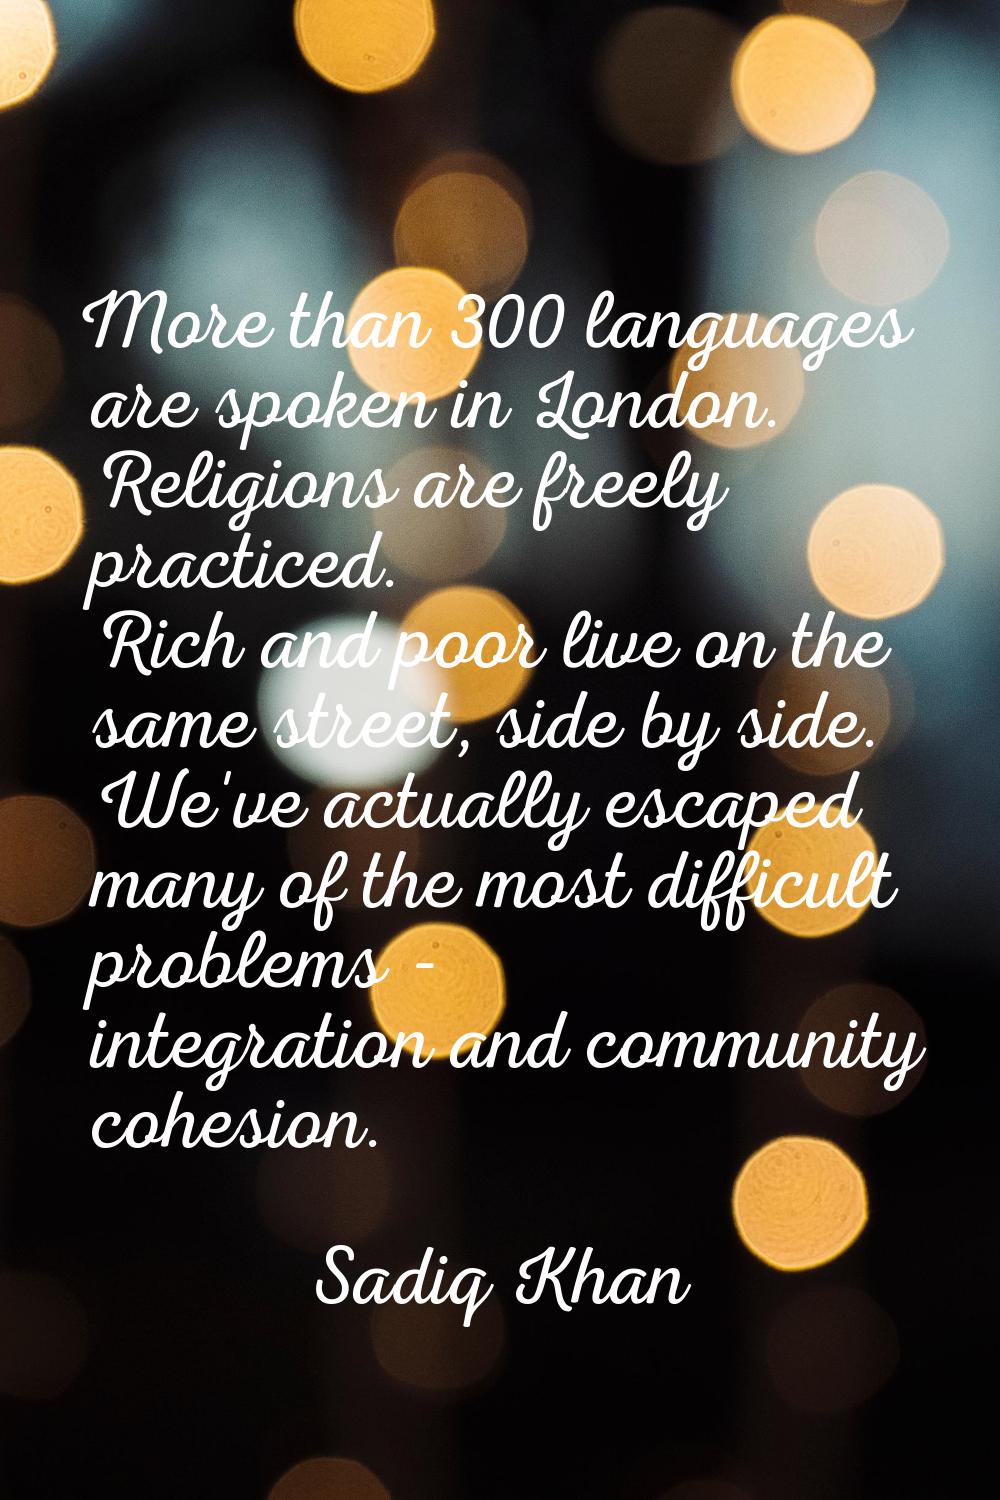 More than 300 languages are spoken in London. Religions are freely practiced. Rich and poor live on